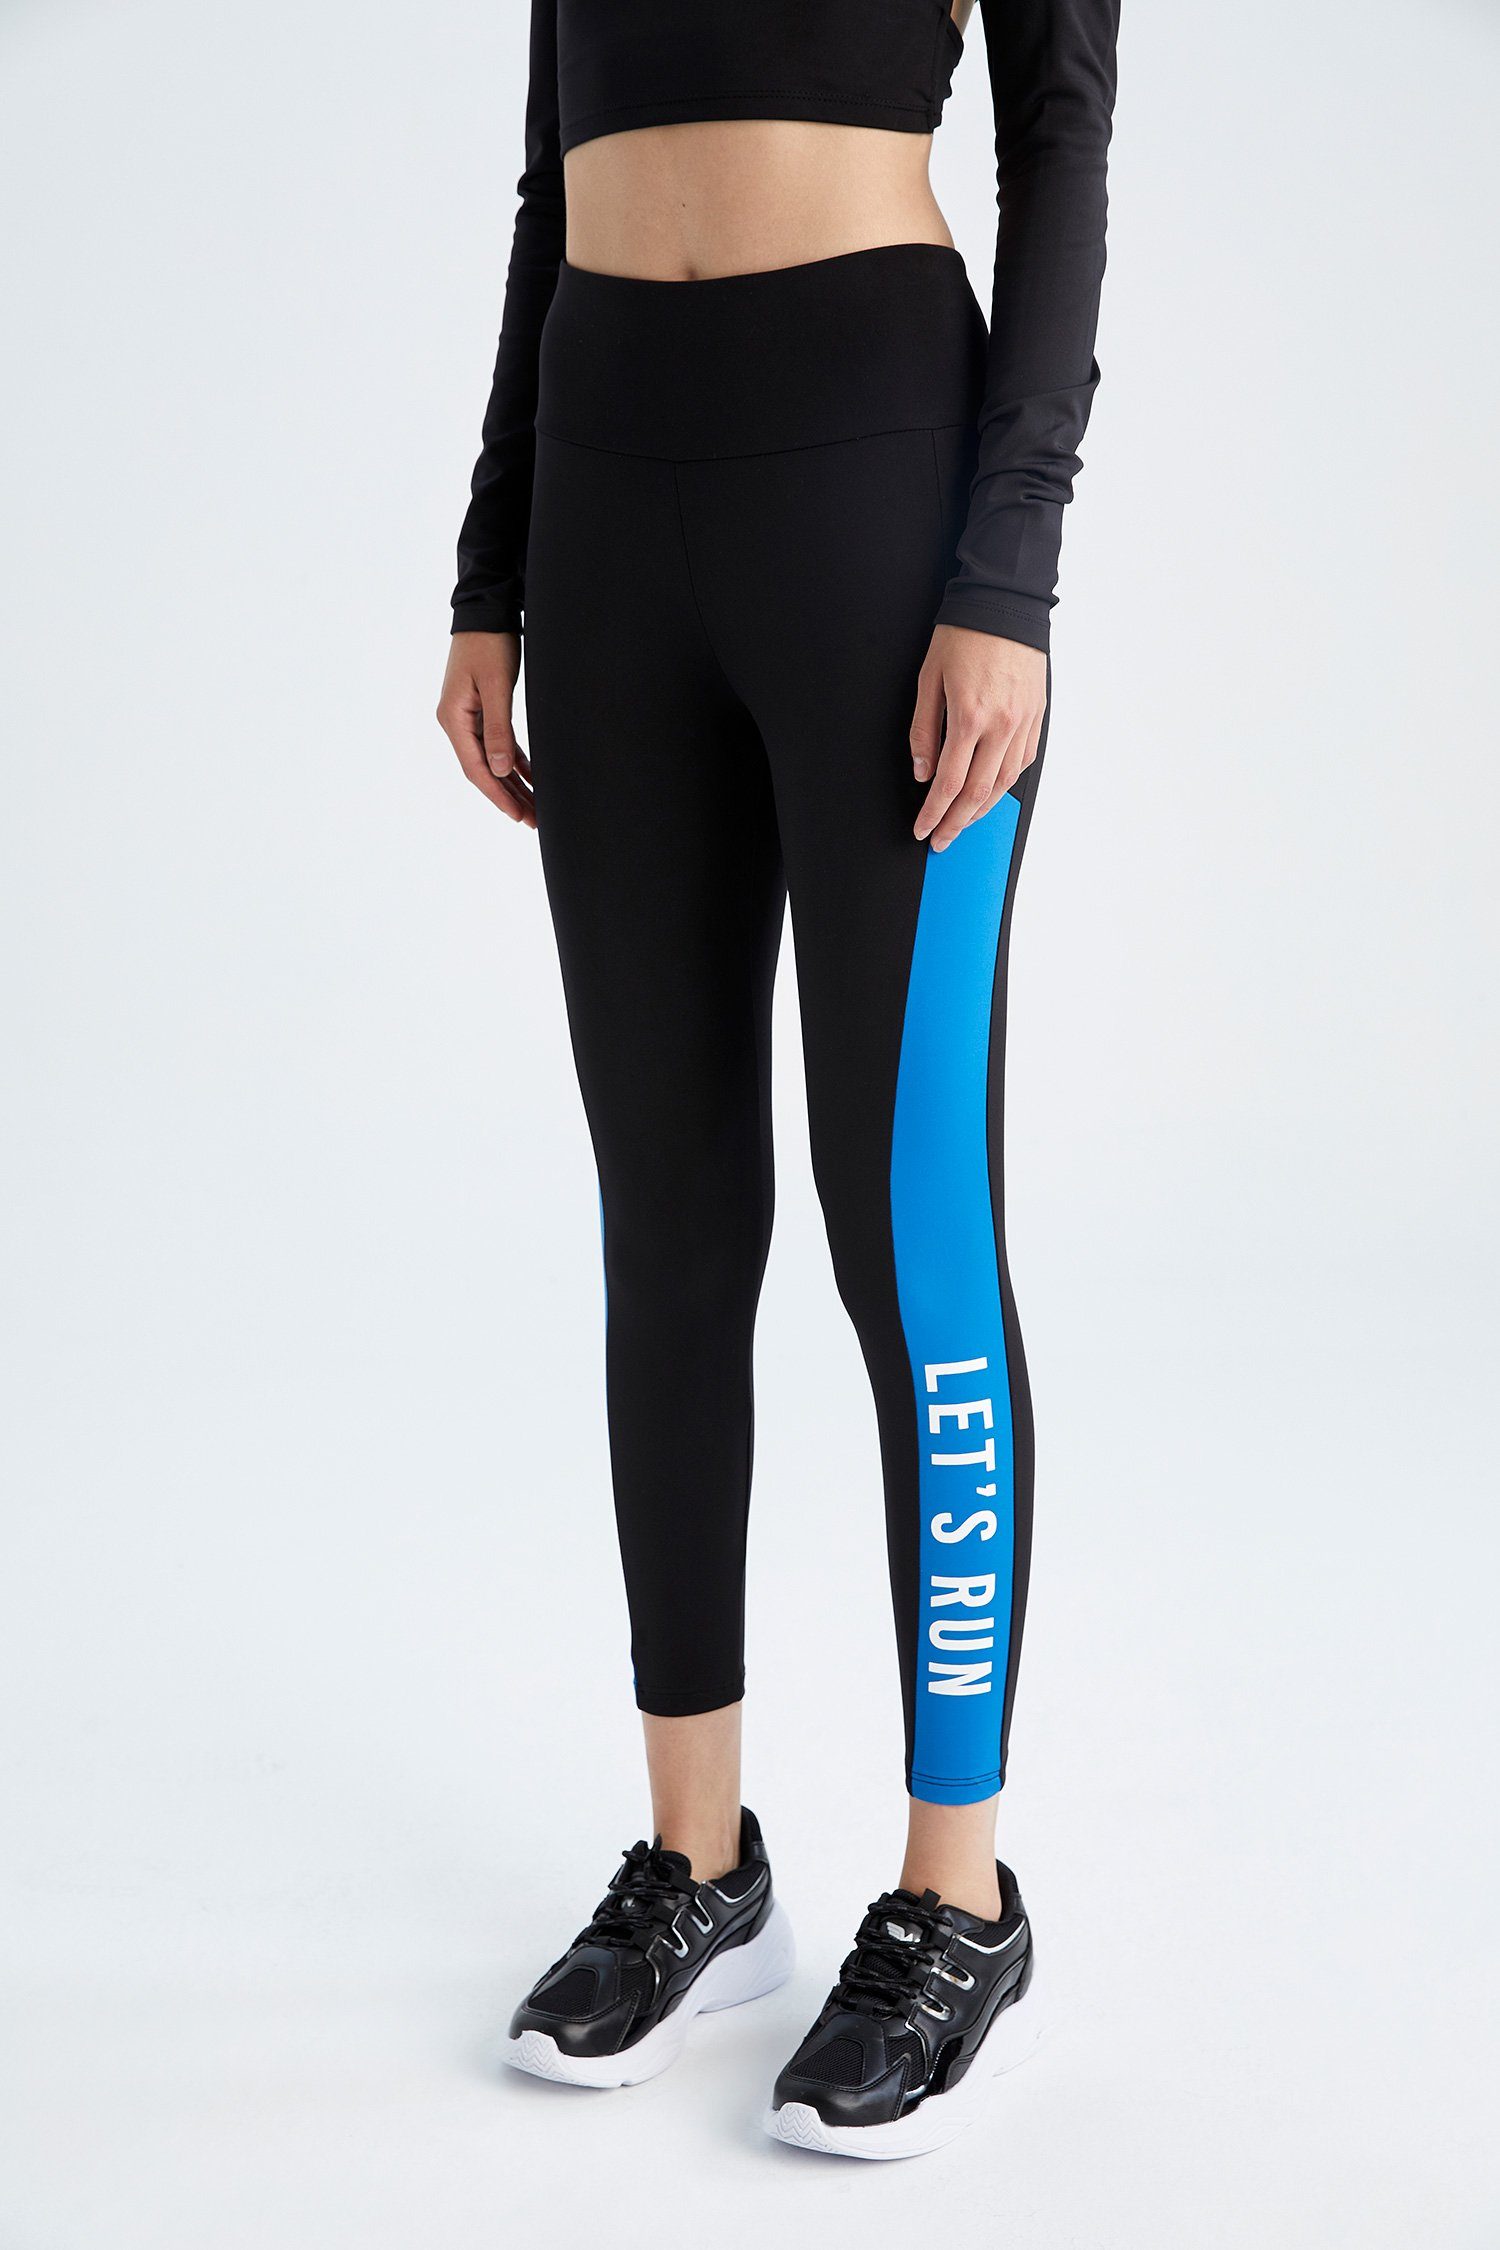 Good Product Online Cost less all the way Sz XS S M Victorias Secret VSX  Knockout Sport Tight Pant Limited Ed New York Fast Delivery to your doorstep